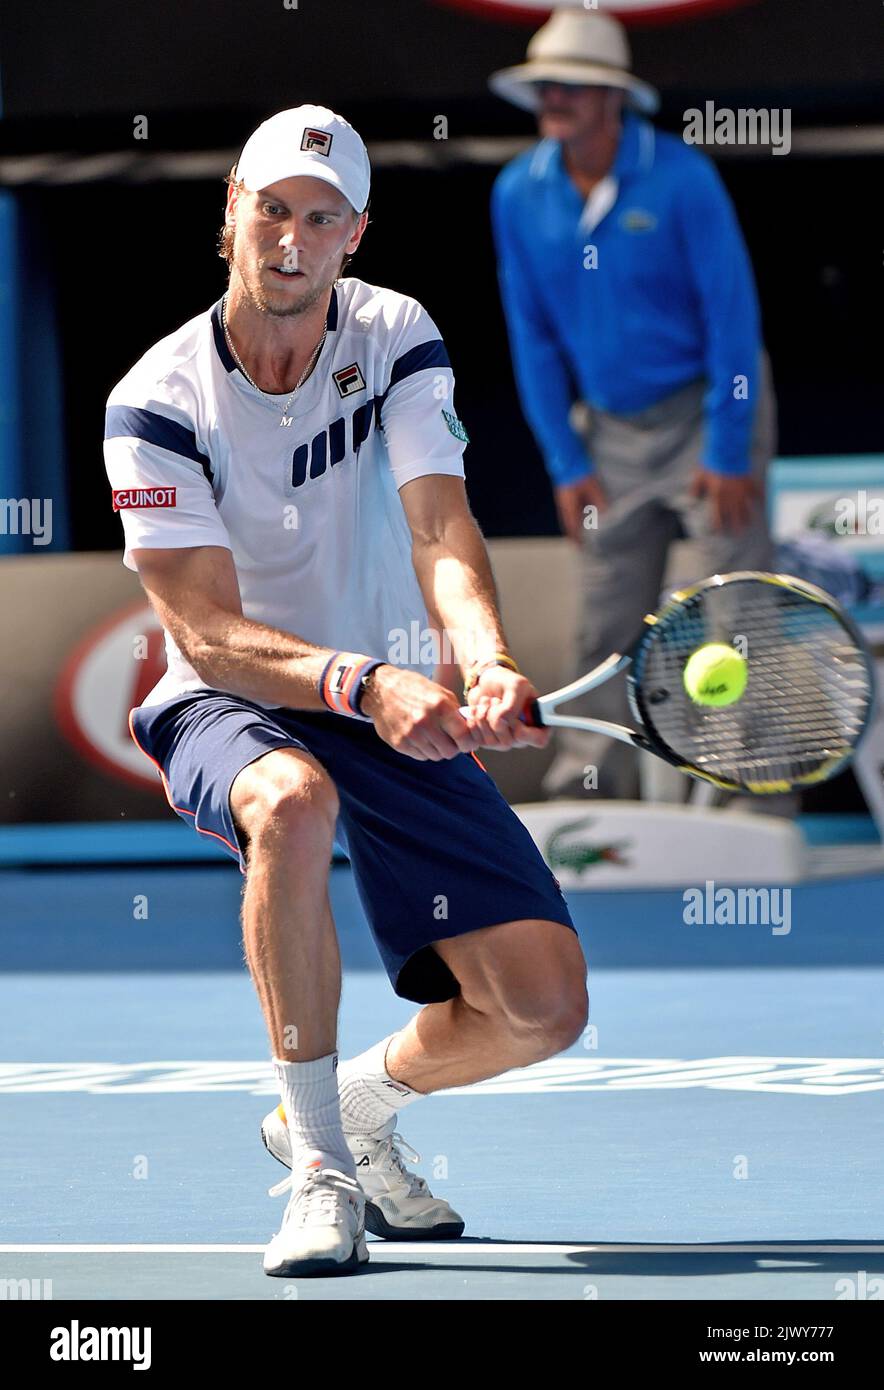 Andreas Seppi of Italy plays Roger Federer of Switzerland during the Australian  Open at Melbourne Park, Melbourne, Friday, Jan. 23, 2015. The Australian  Open tennis tournament will go from the 19th of